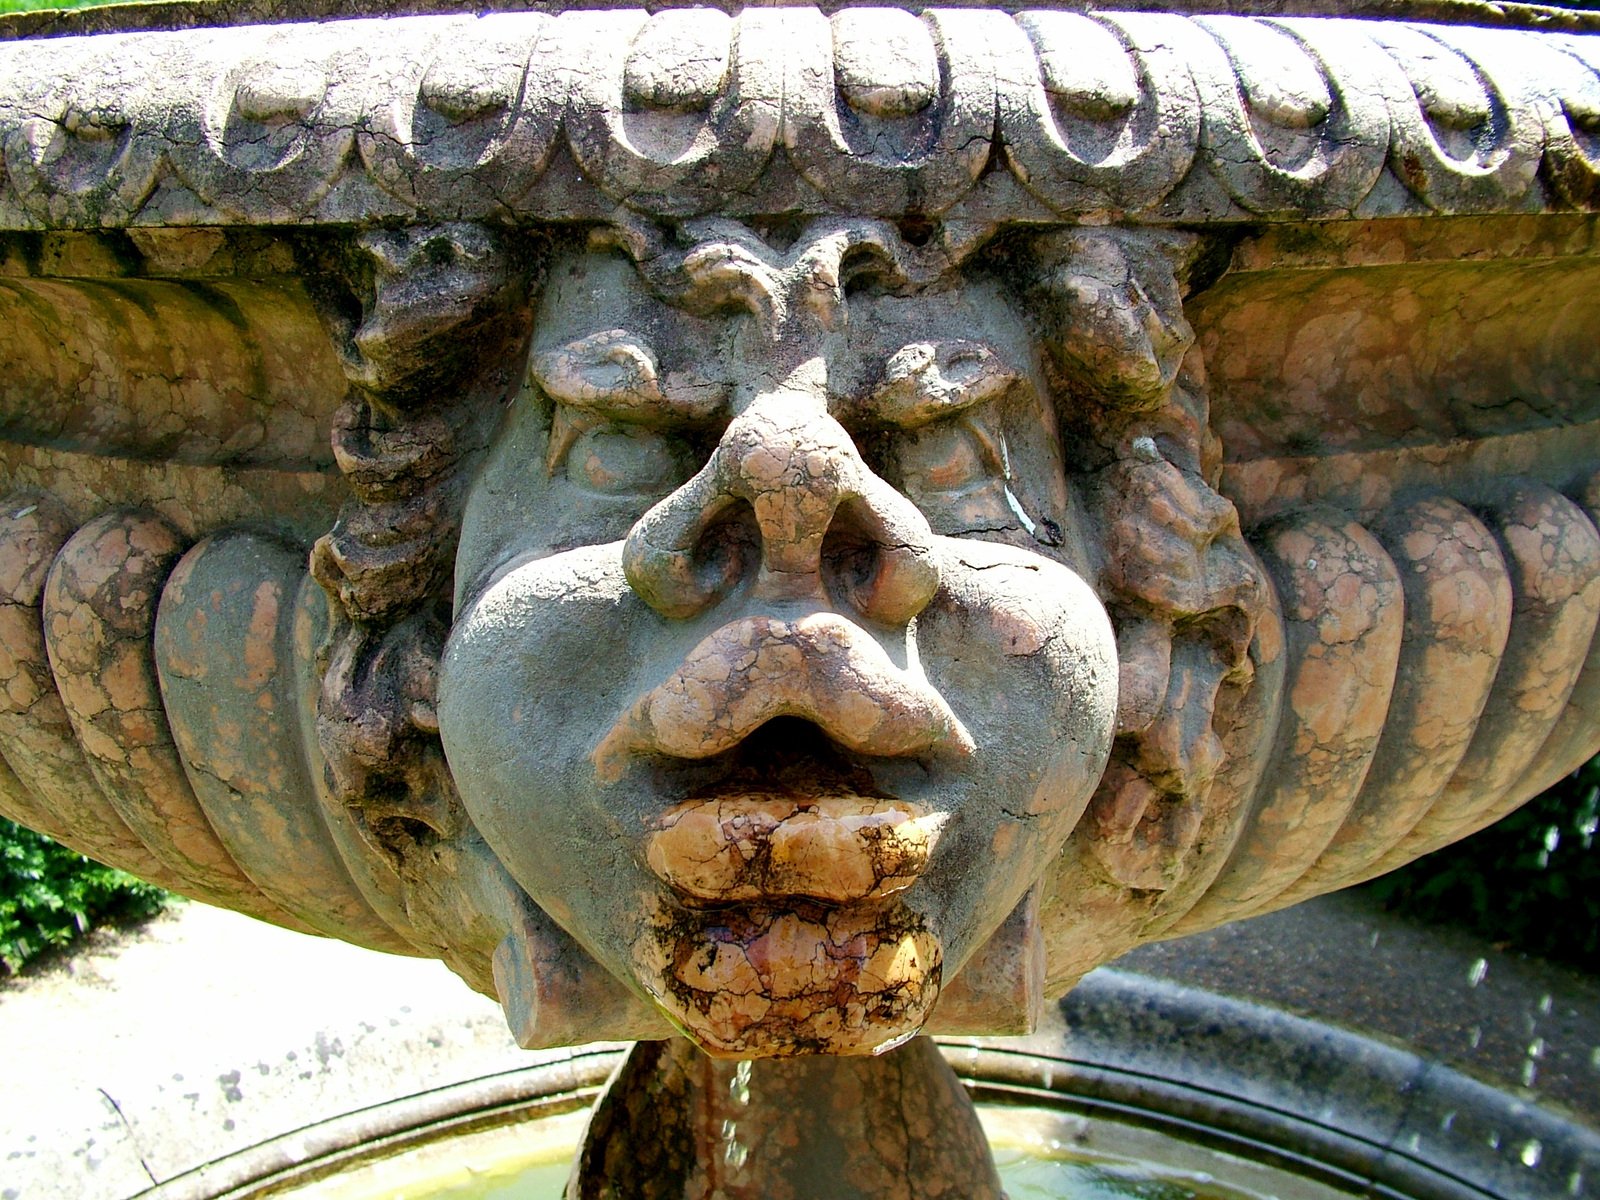 a stone urn with a weird face at its center